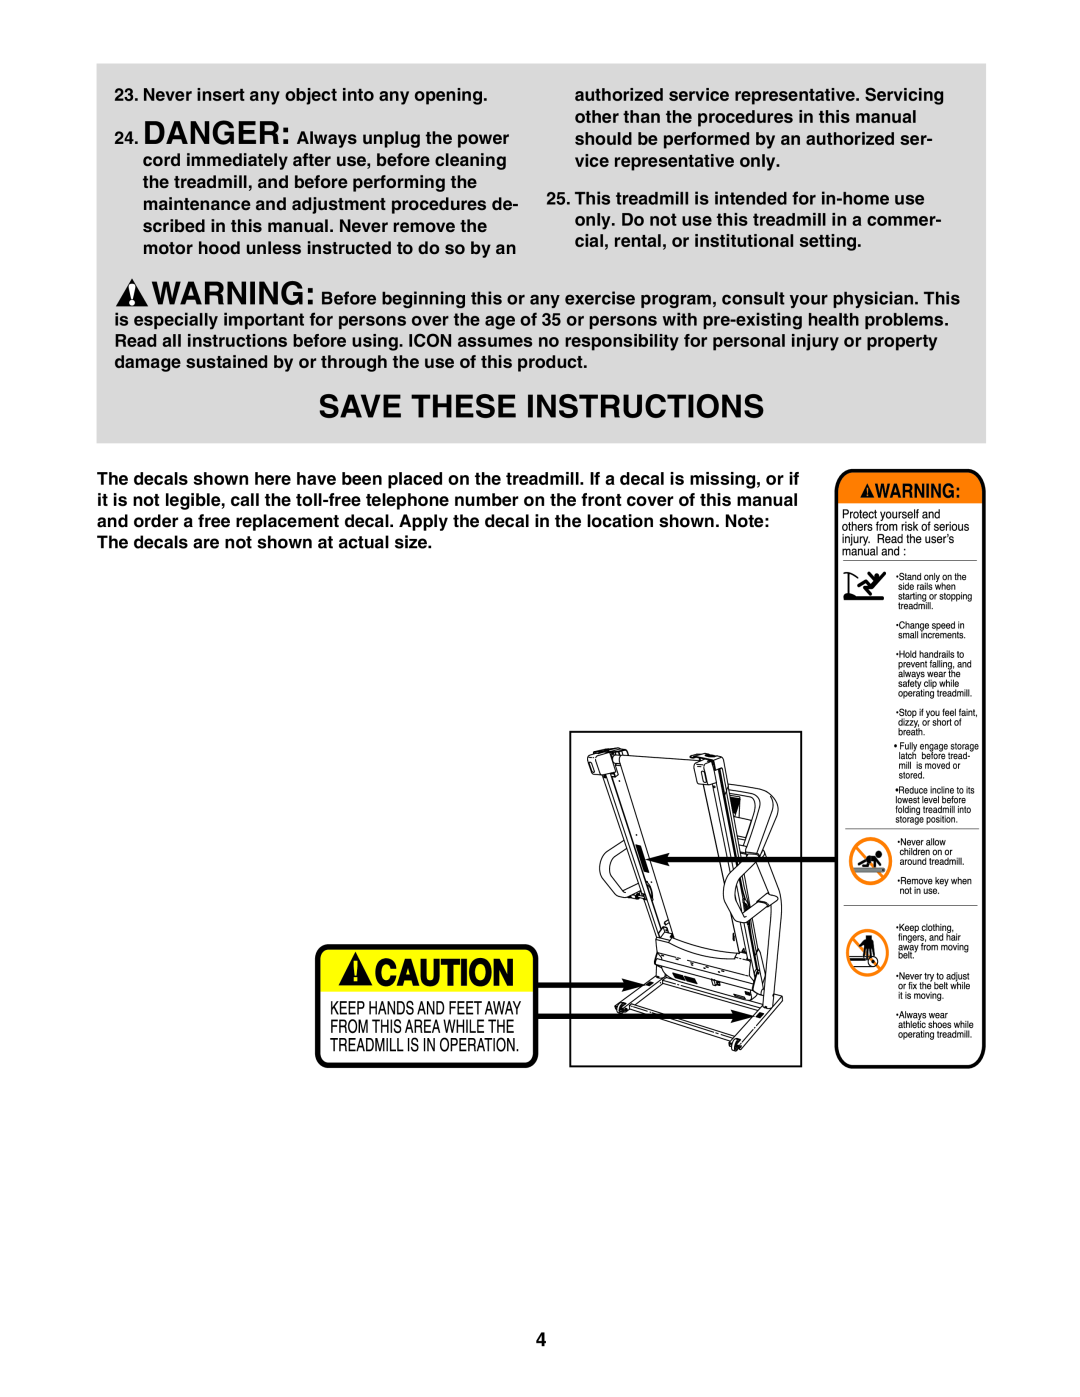 Image IMTL49105.0 user manual Save These Instructions, Never insert any object into any opening 